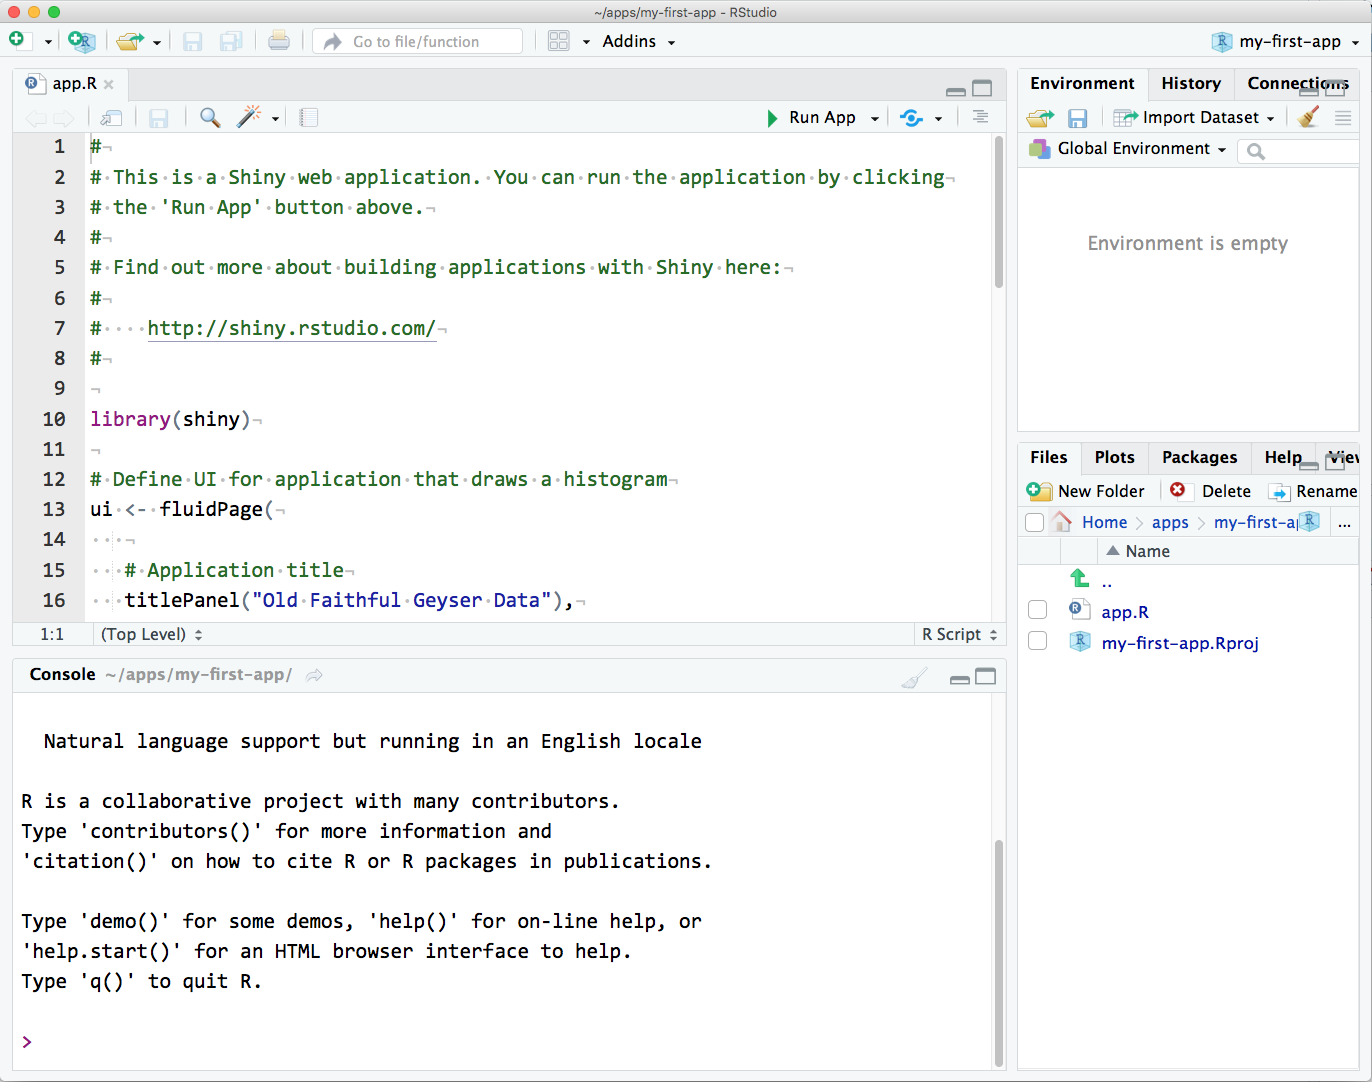 RStudio interface with the built-in demo app loaded.